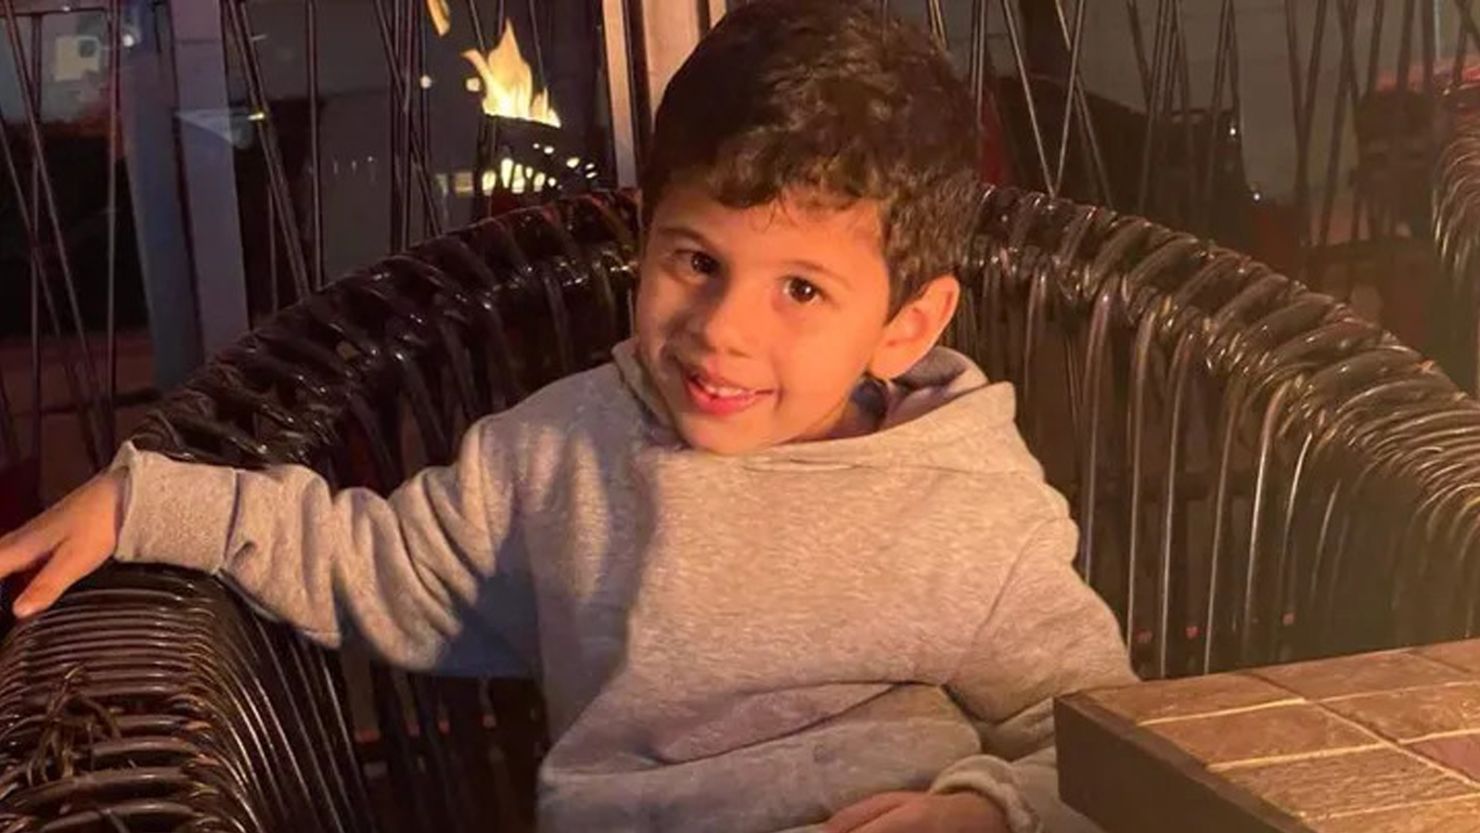 A man has been charged with murder in the killing of 4-year-old Gor Adamyan during a suspected road rage shooting last week, the Los Angeles County District Attorney's Office said on Tuesday, December 19.